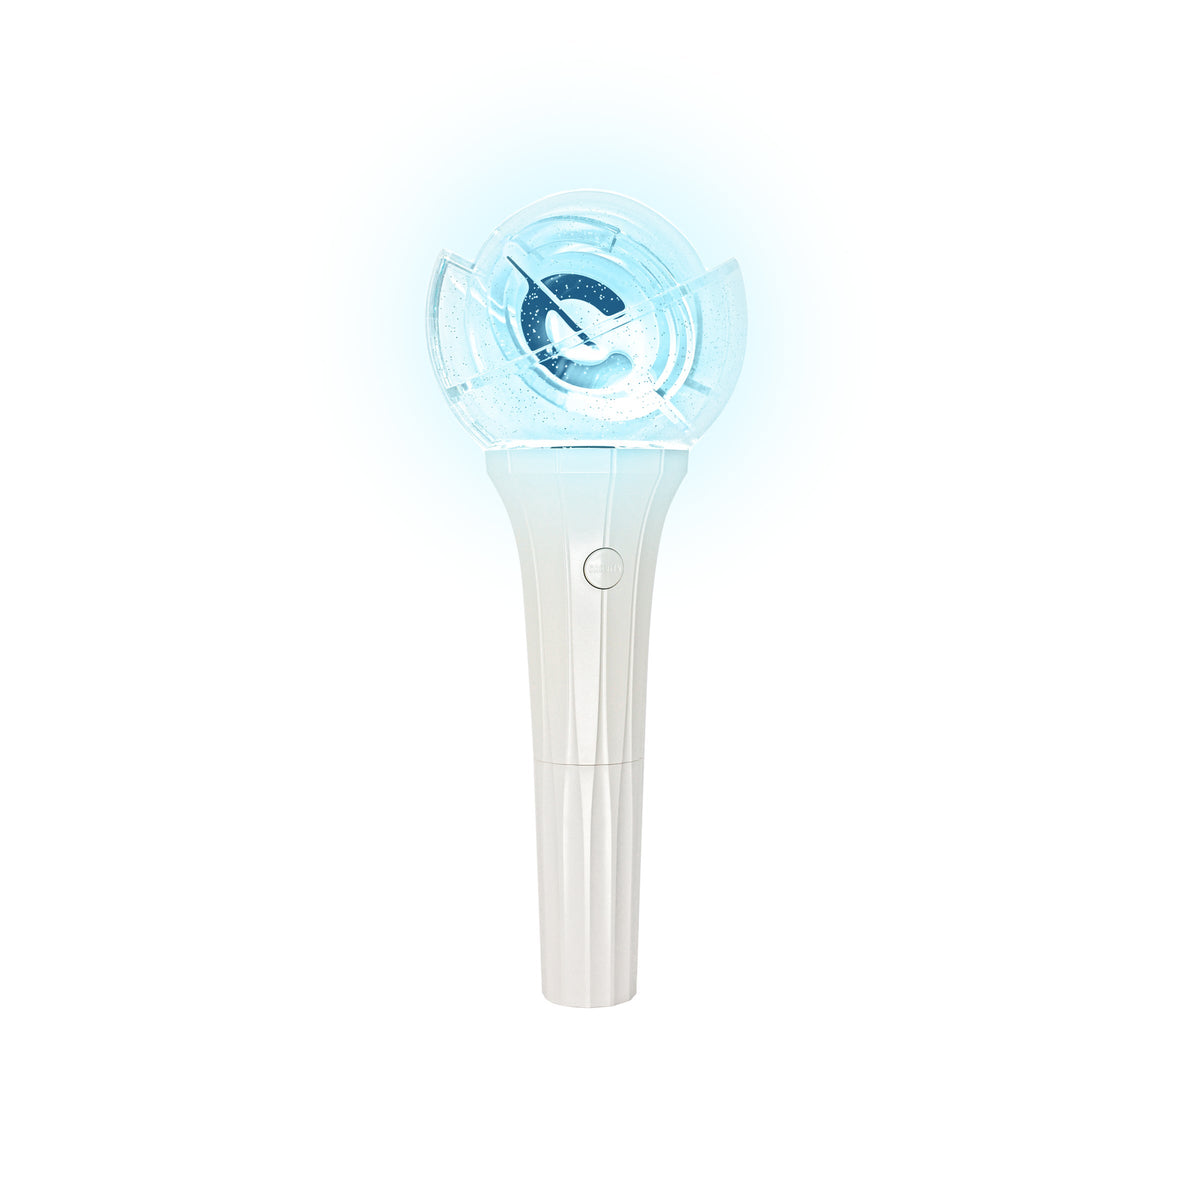 CRAVITY Official Light Stick Main Product Image 2